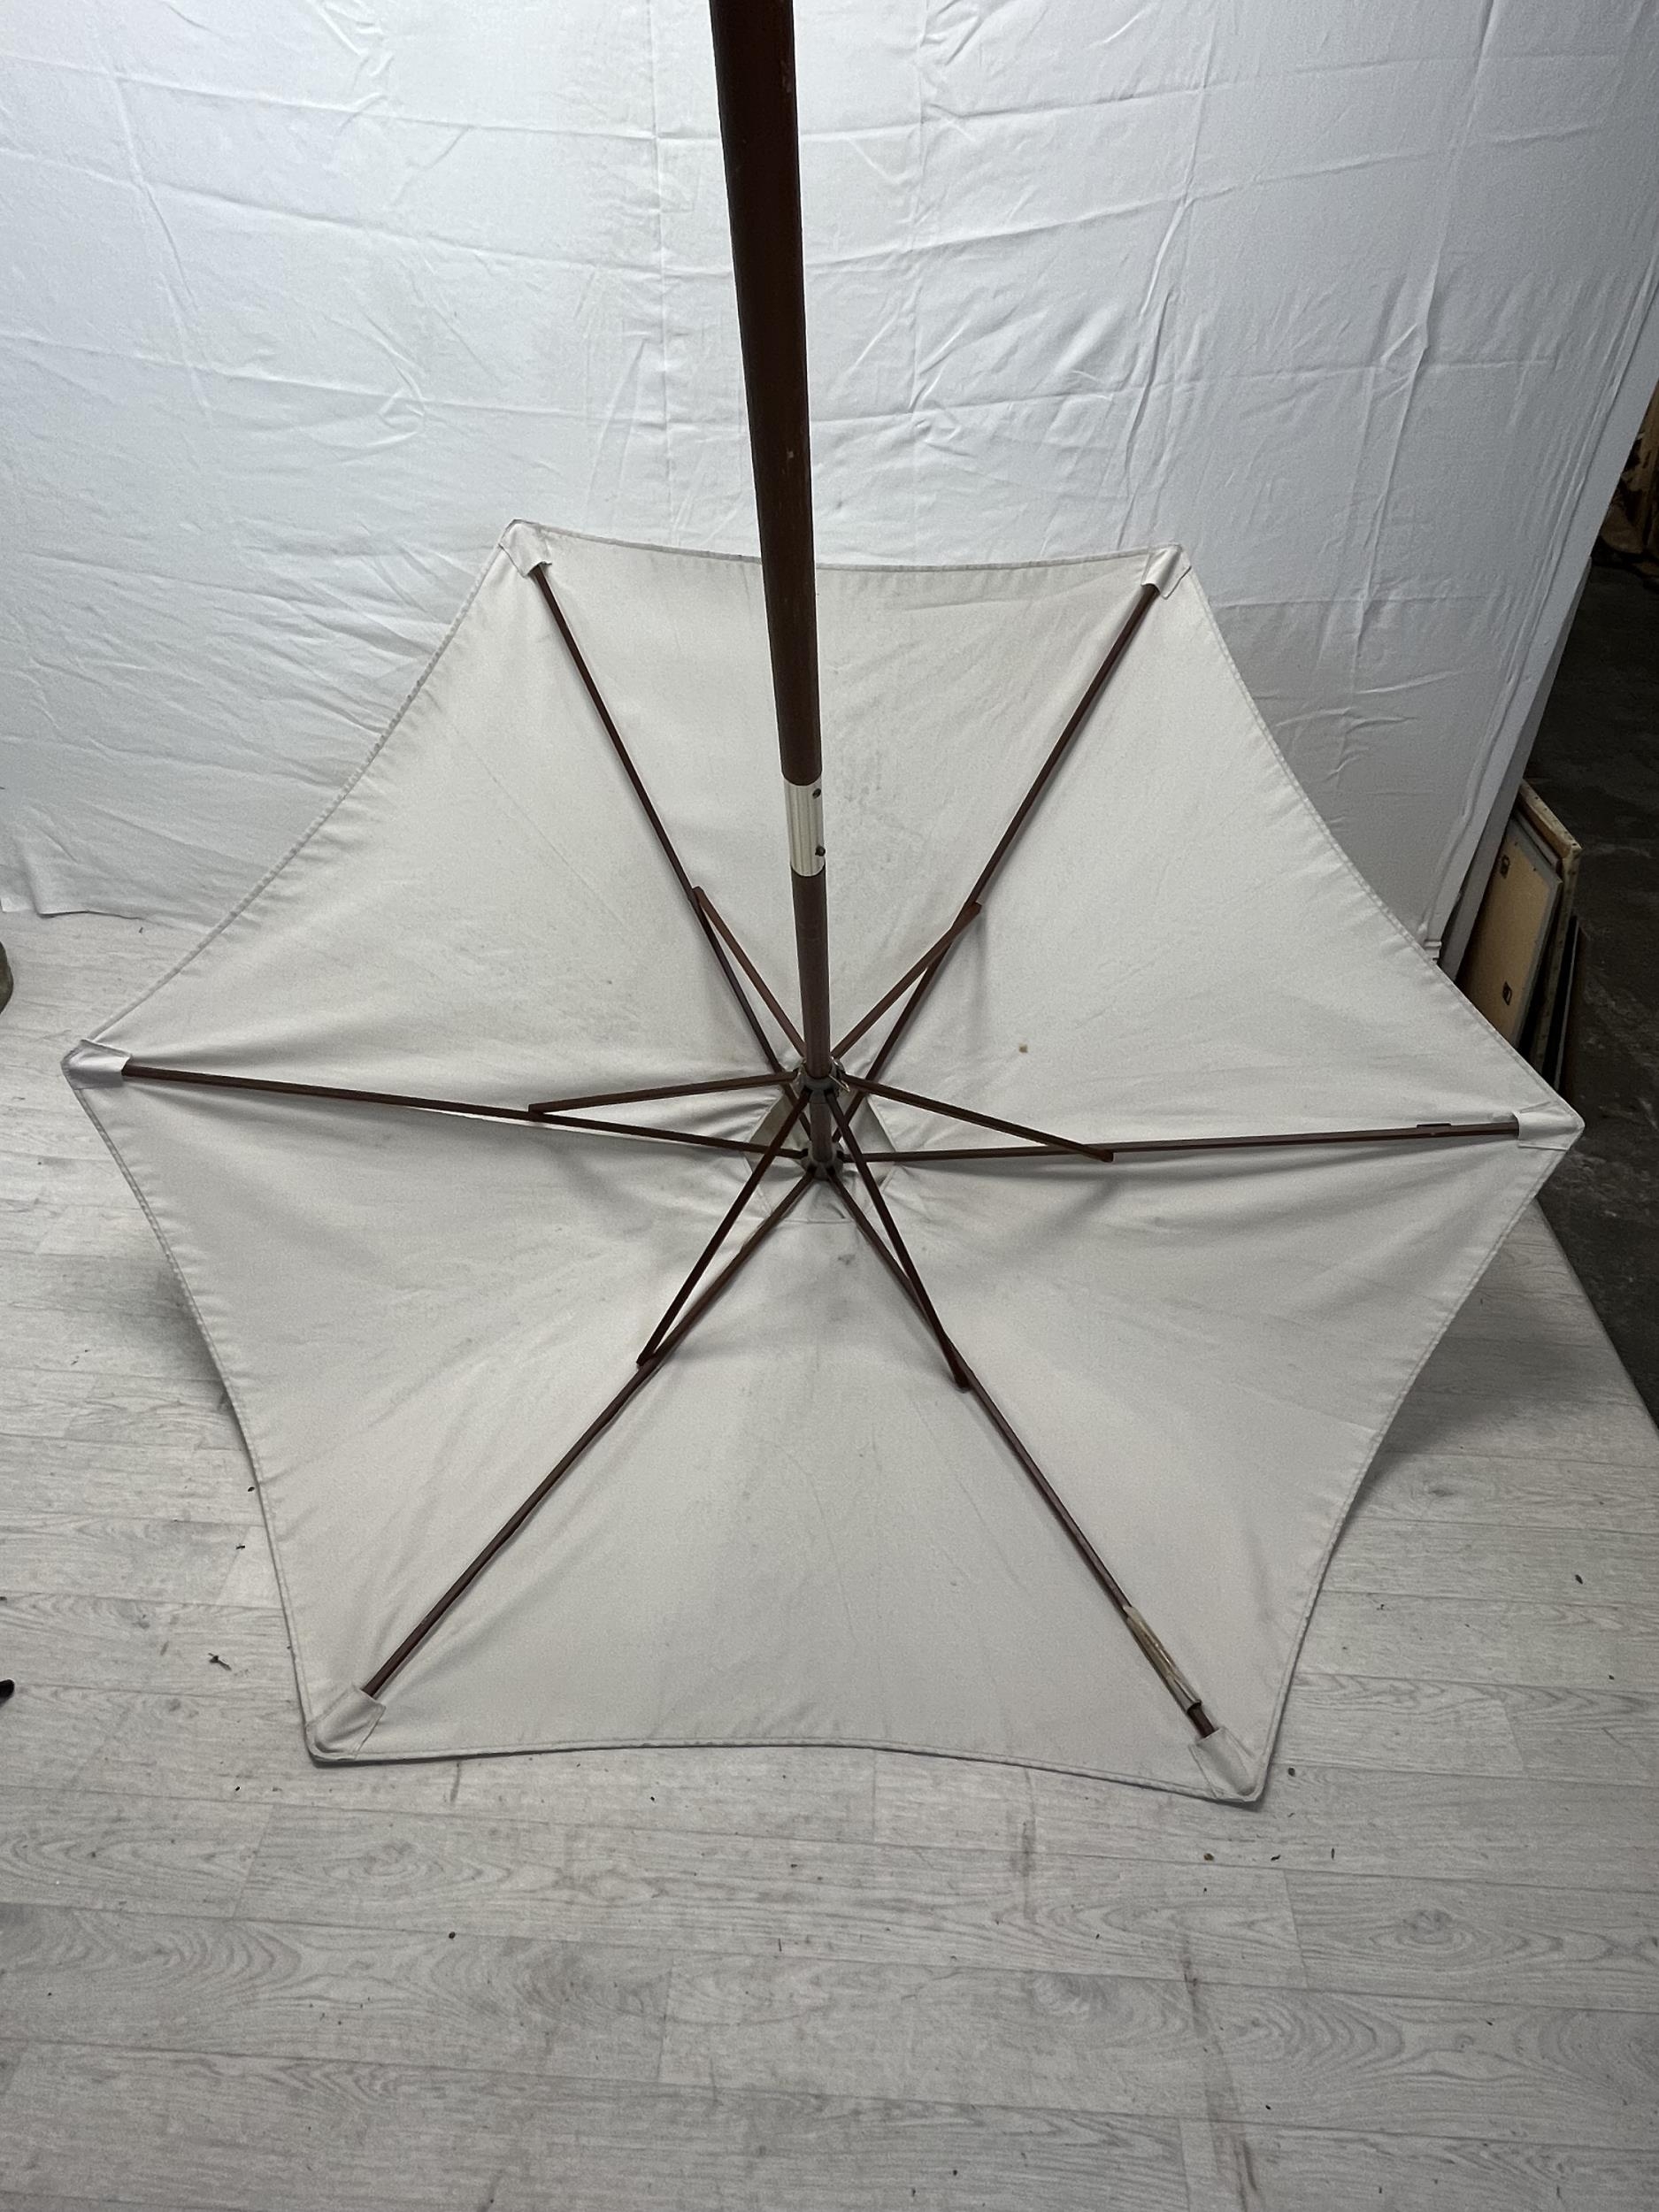 An adjustable wind up parasol, Dia.228cm H.230cm. with concrete base along with another slightly - Image 6 of 7